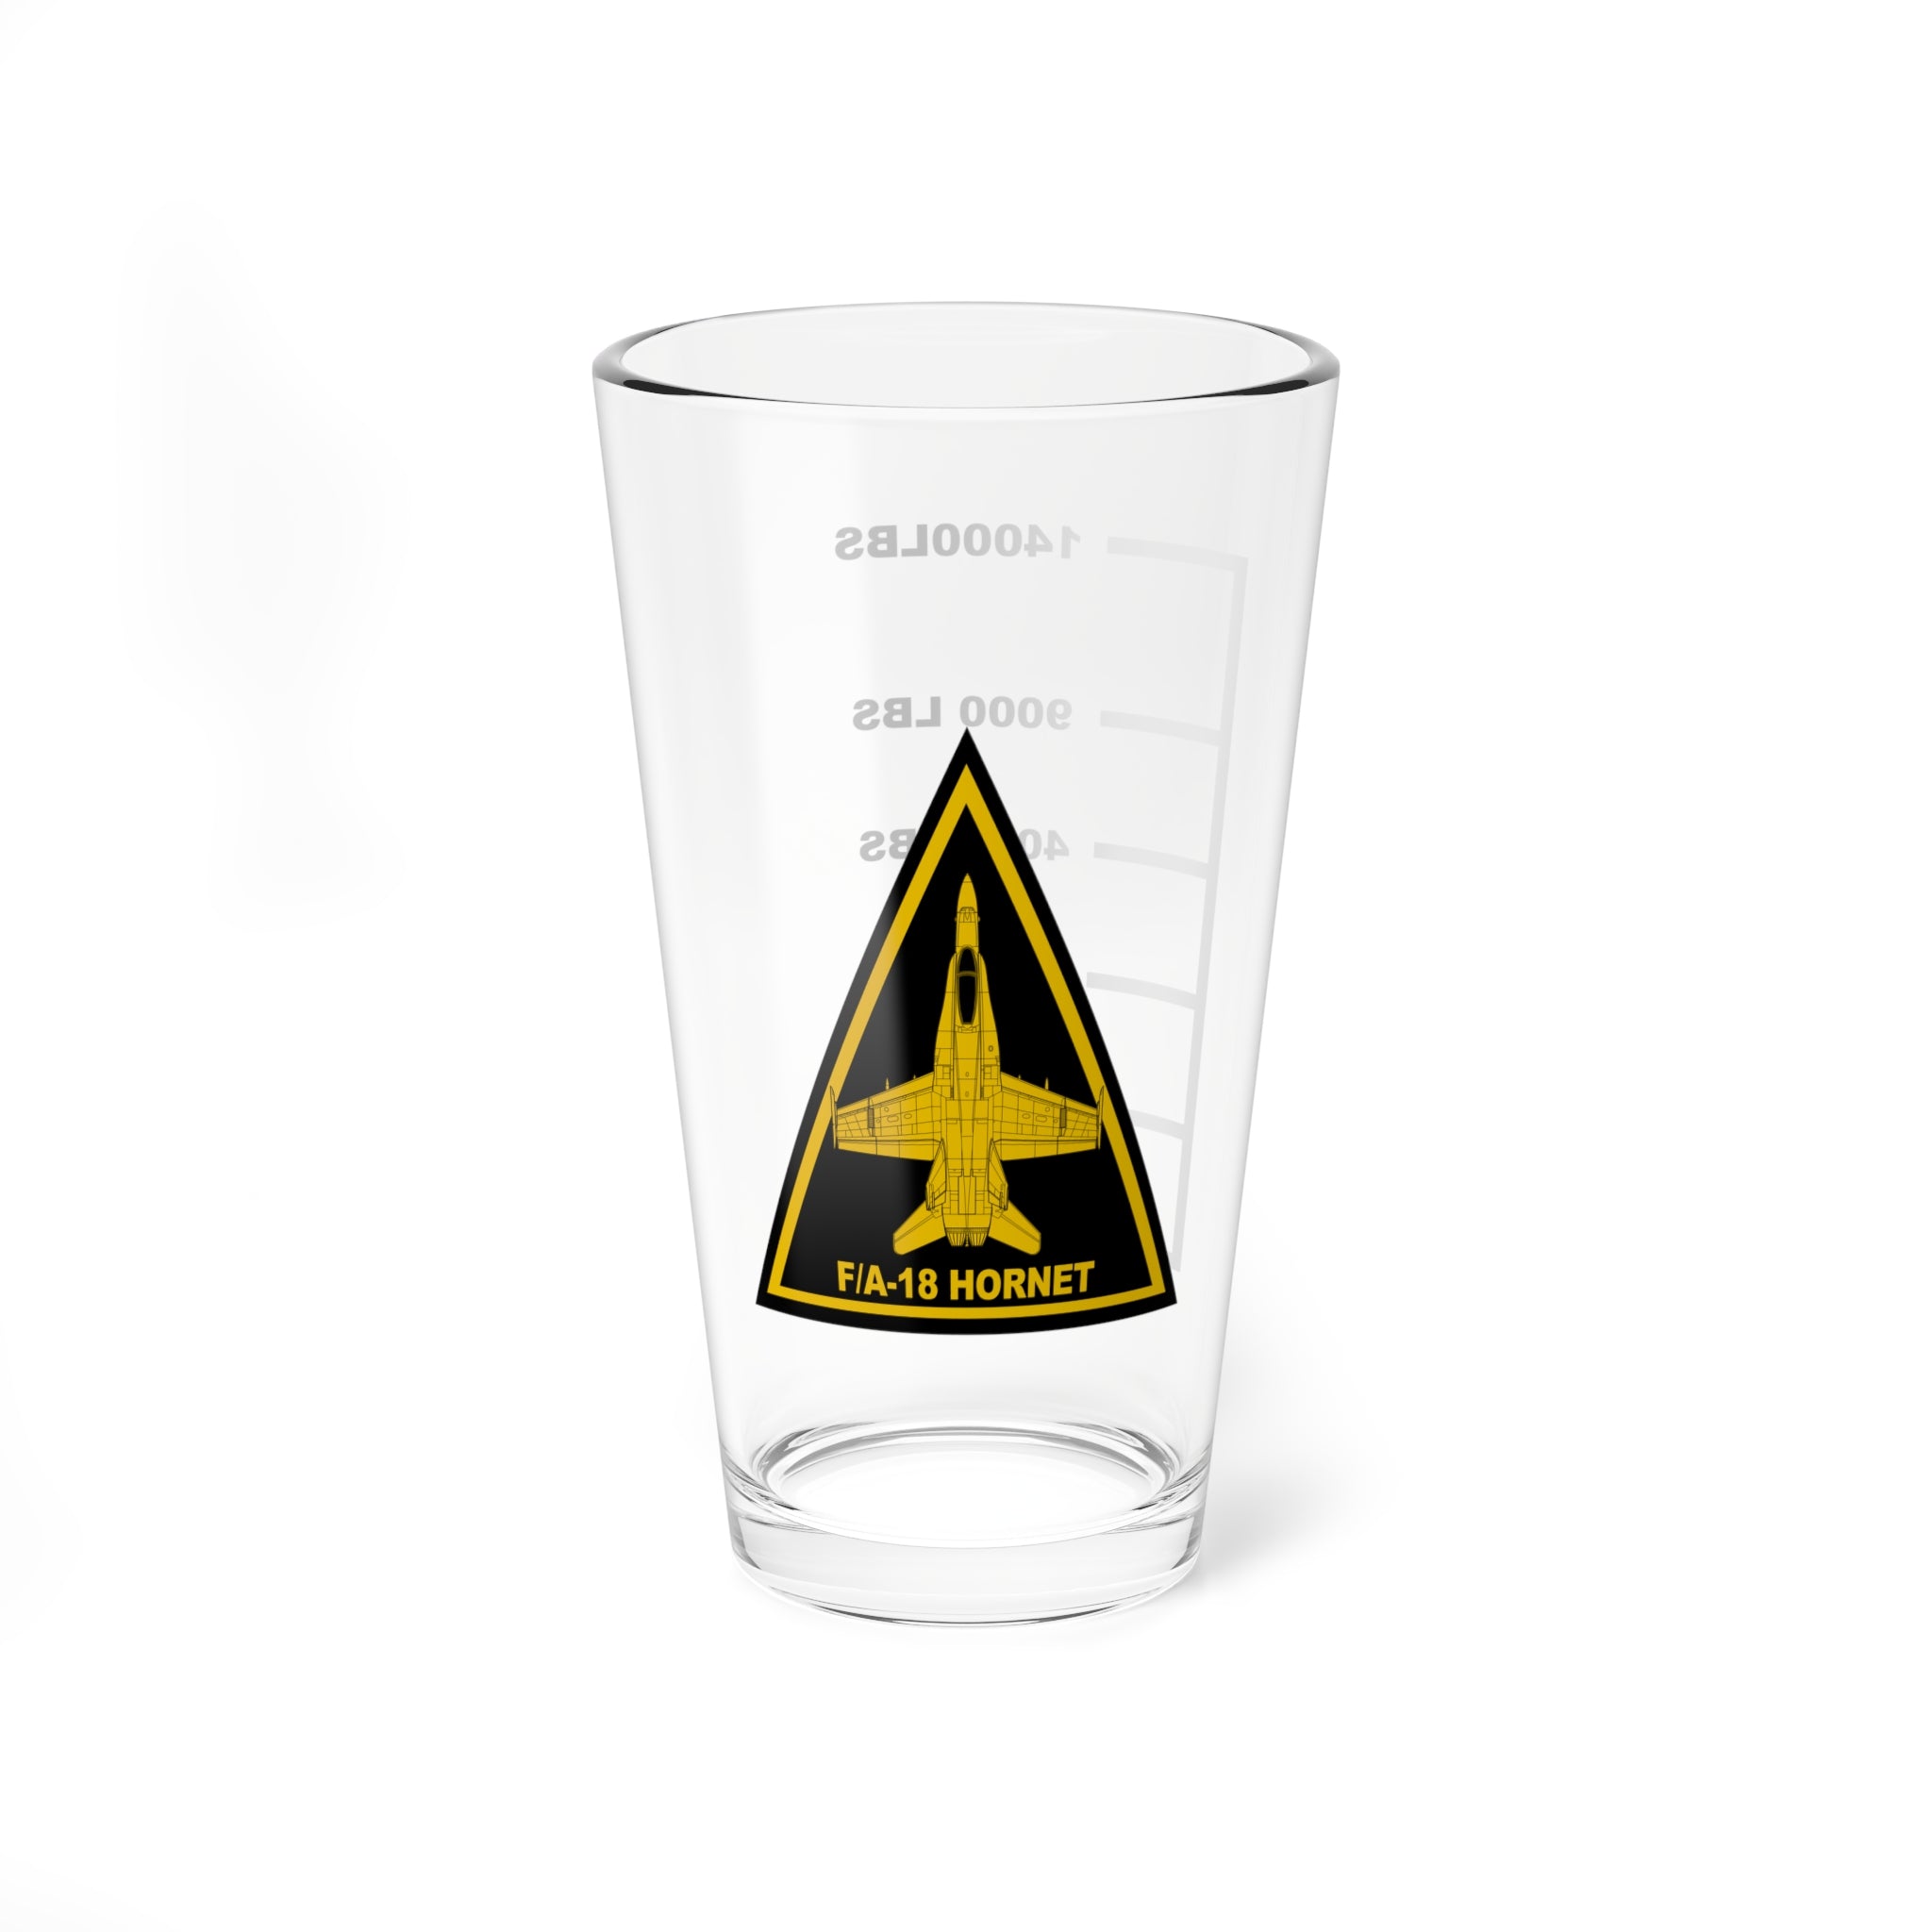 F-18 Hornet Logo Fuel Low Pint Glass, Navy / Marine Corps Strike Fighter (VFA) Aircraft